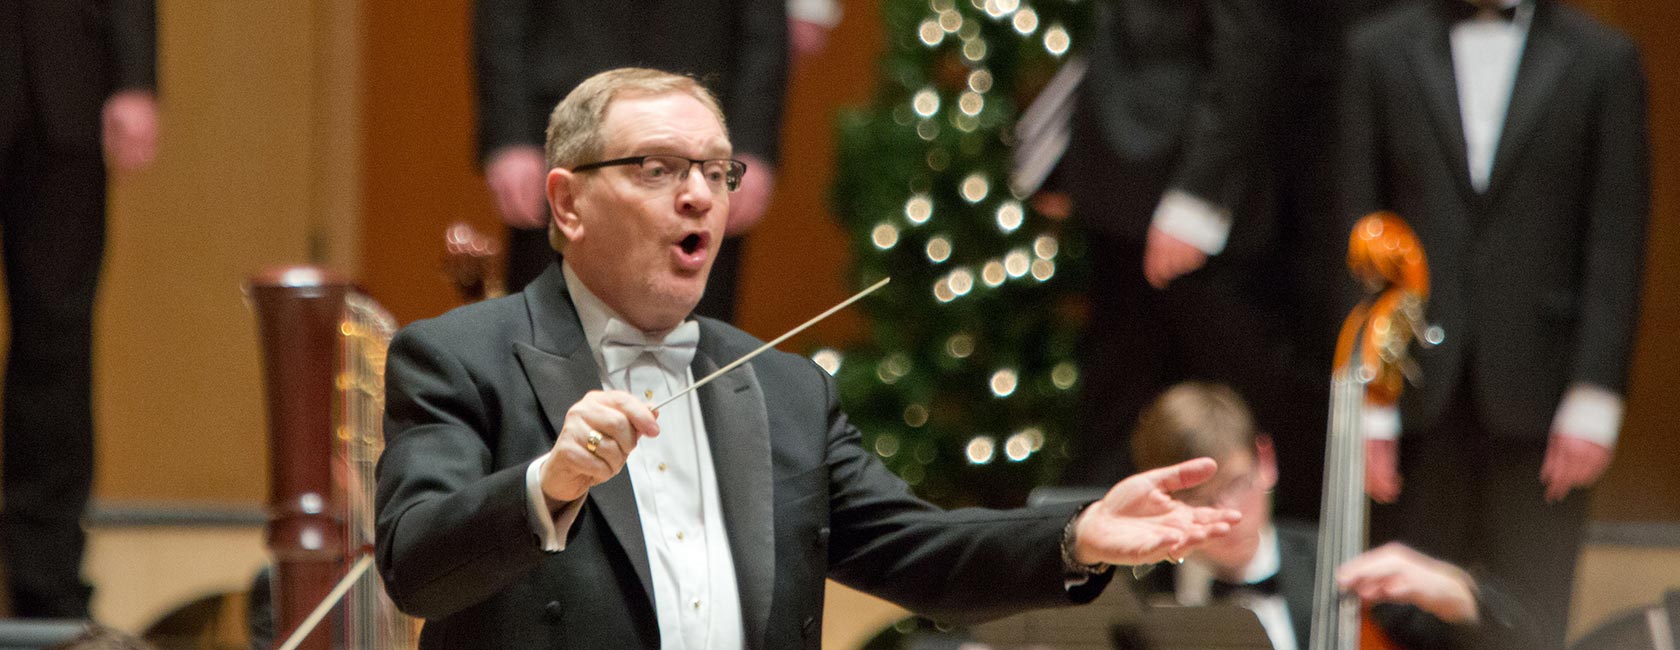 Dr. Richard Nance conducts The Choir of the West at a 2014 PLU Christmas Concert. (PLU Photo/John Froschauer)